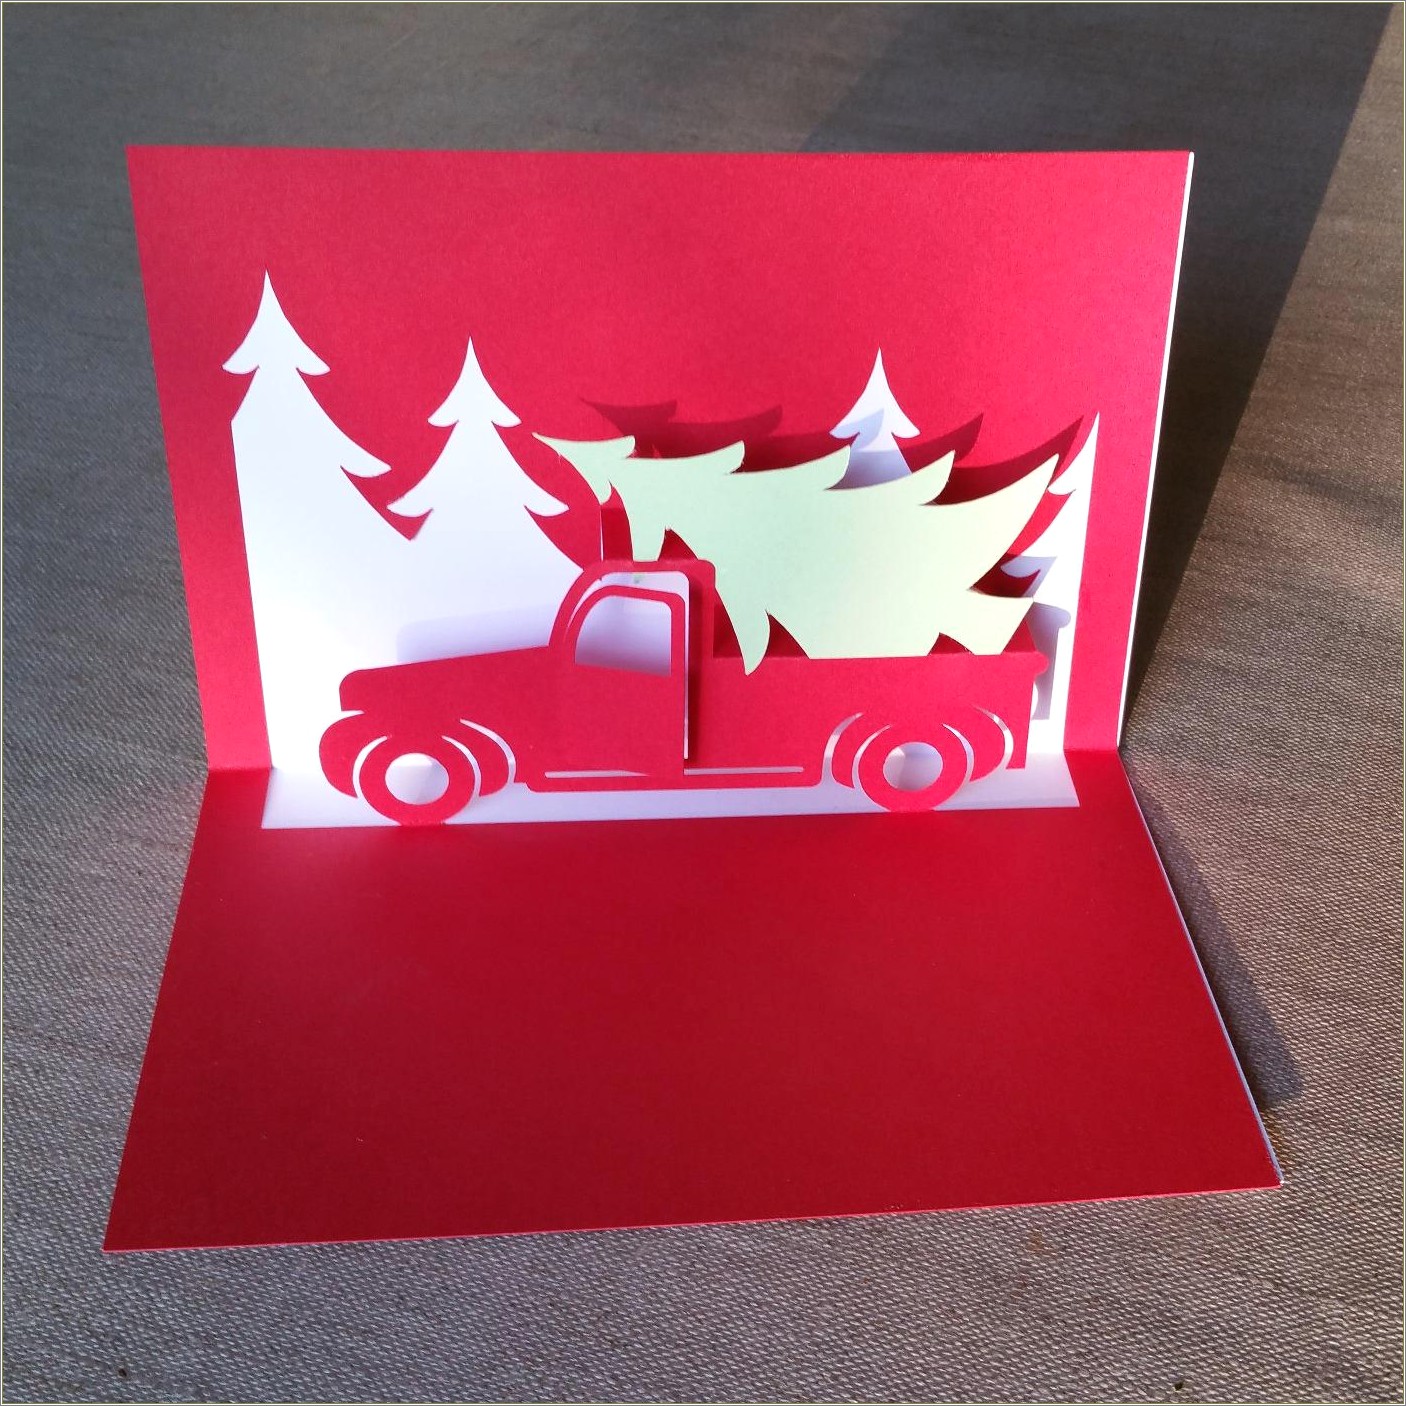 Free Popup Card Templates For The Cricut